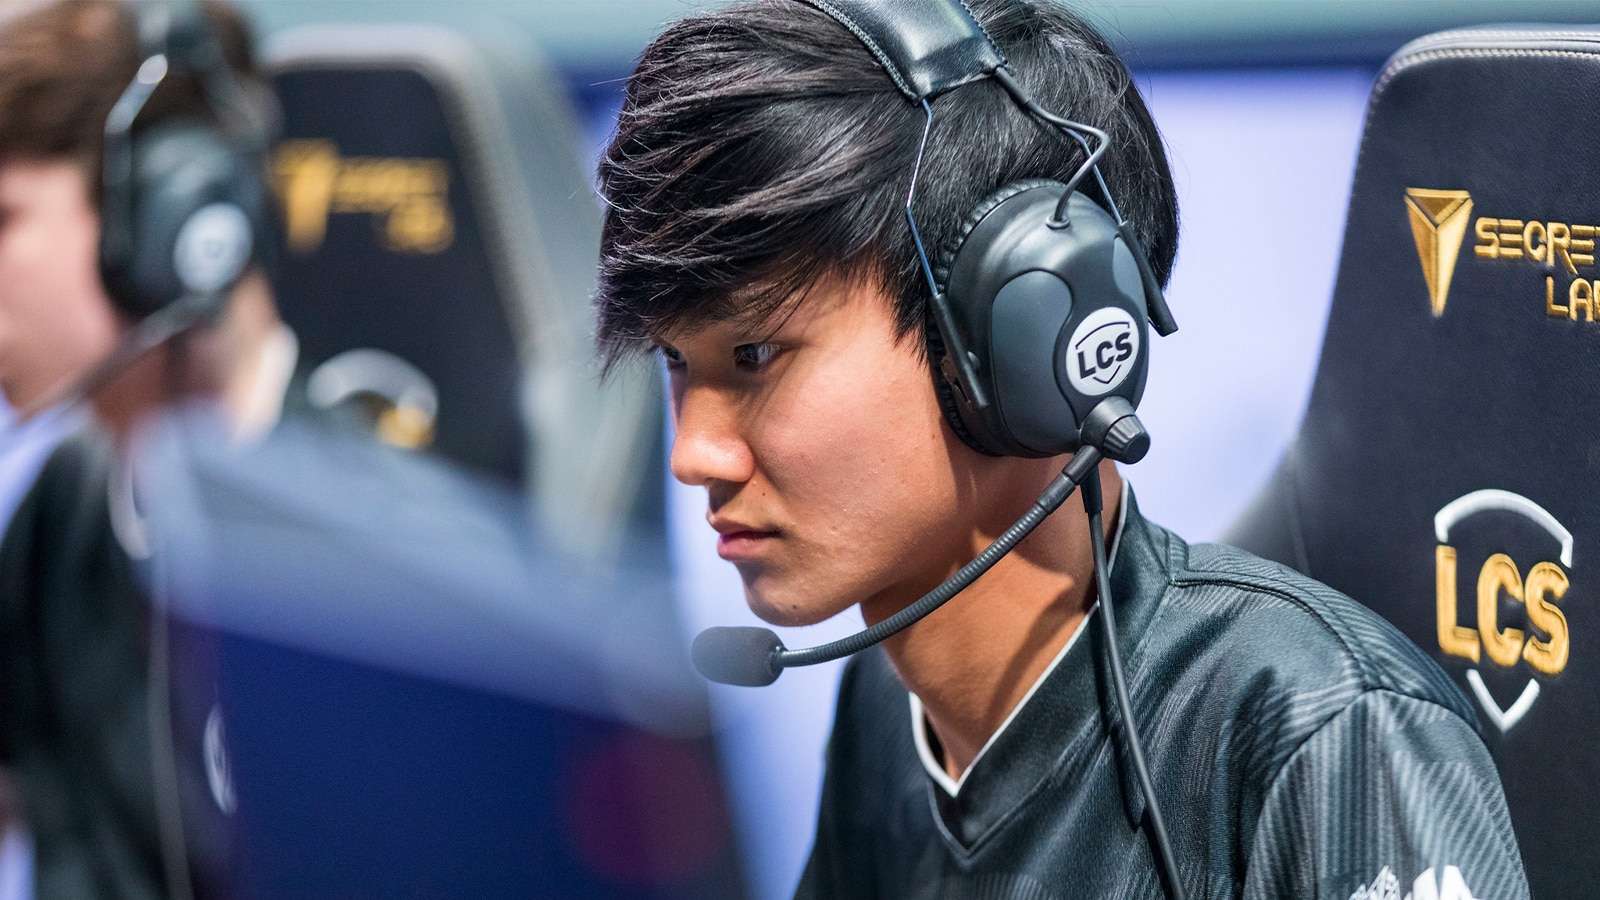 Lost playing for TSM in LCS